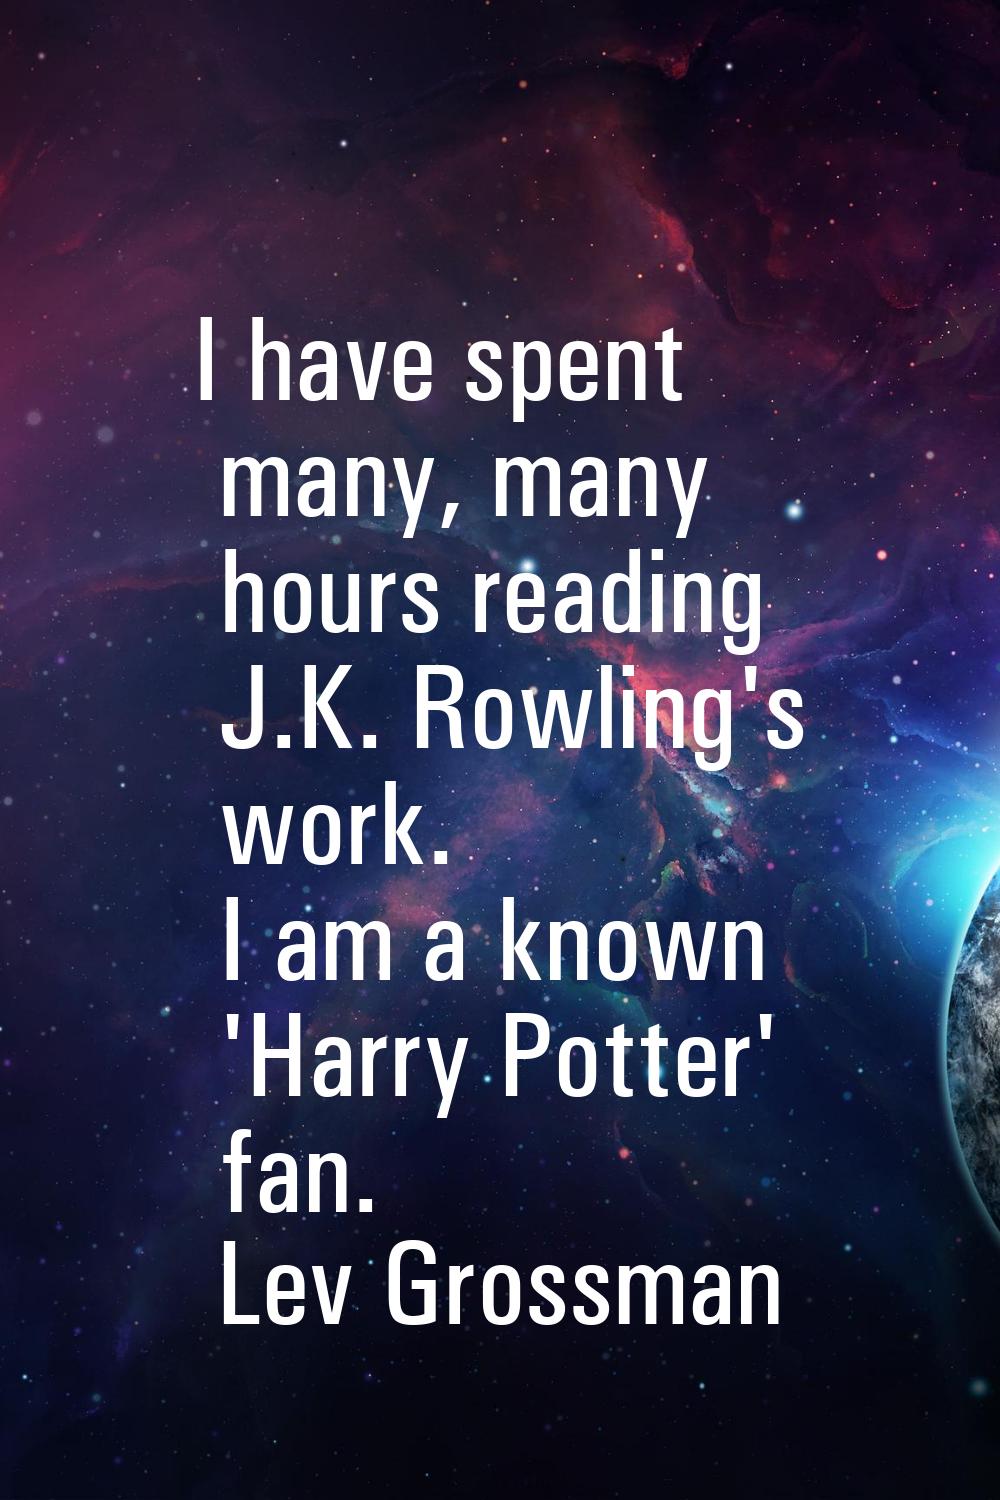 I have spent many, many hours reading J.K. Rowling's work. I am a known 'Harry Potter' fan.